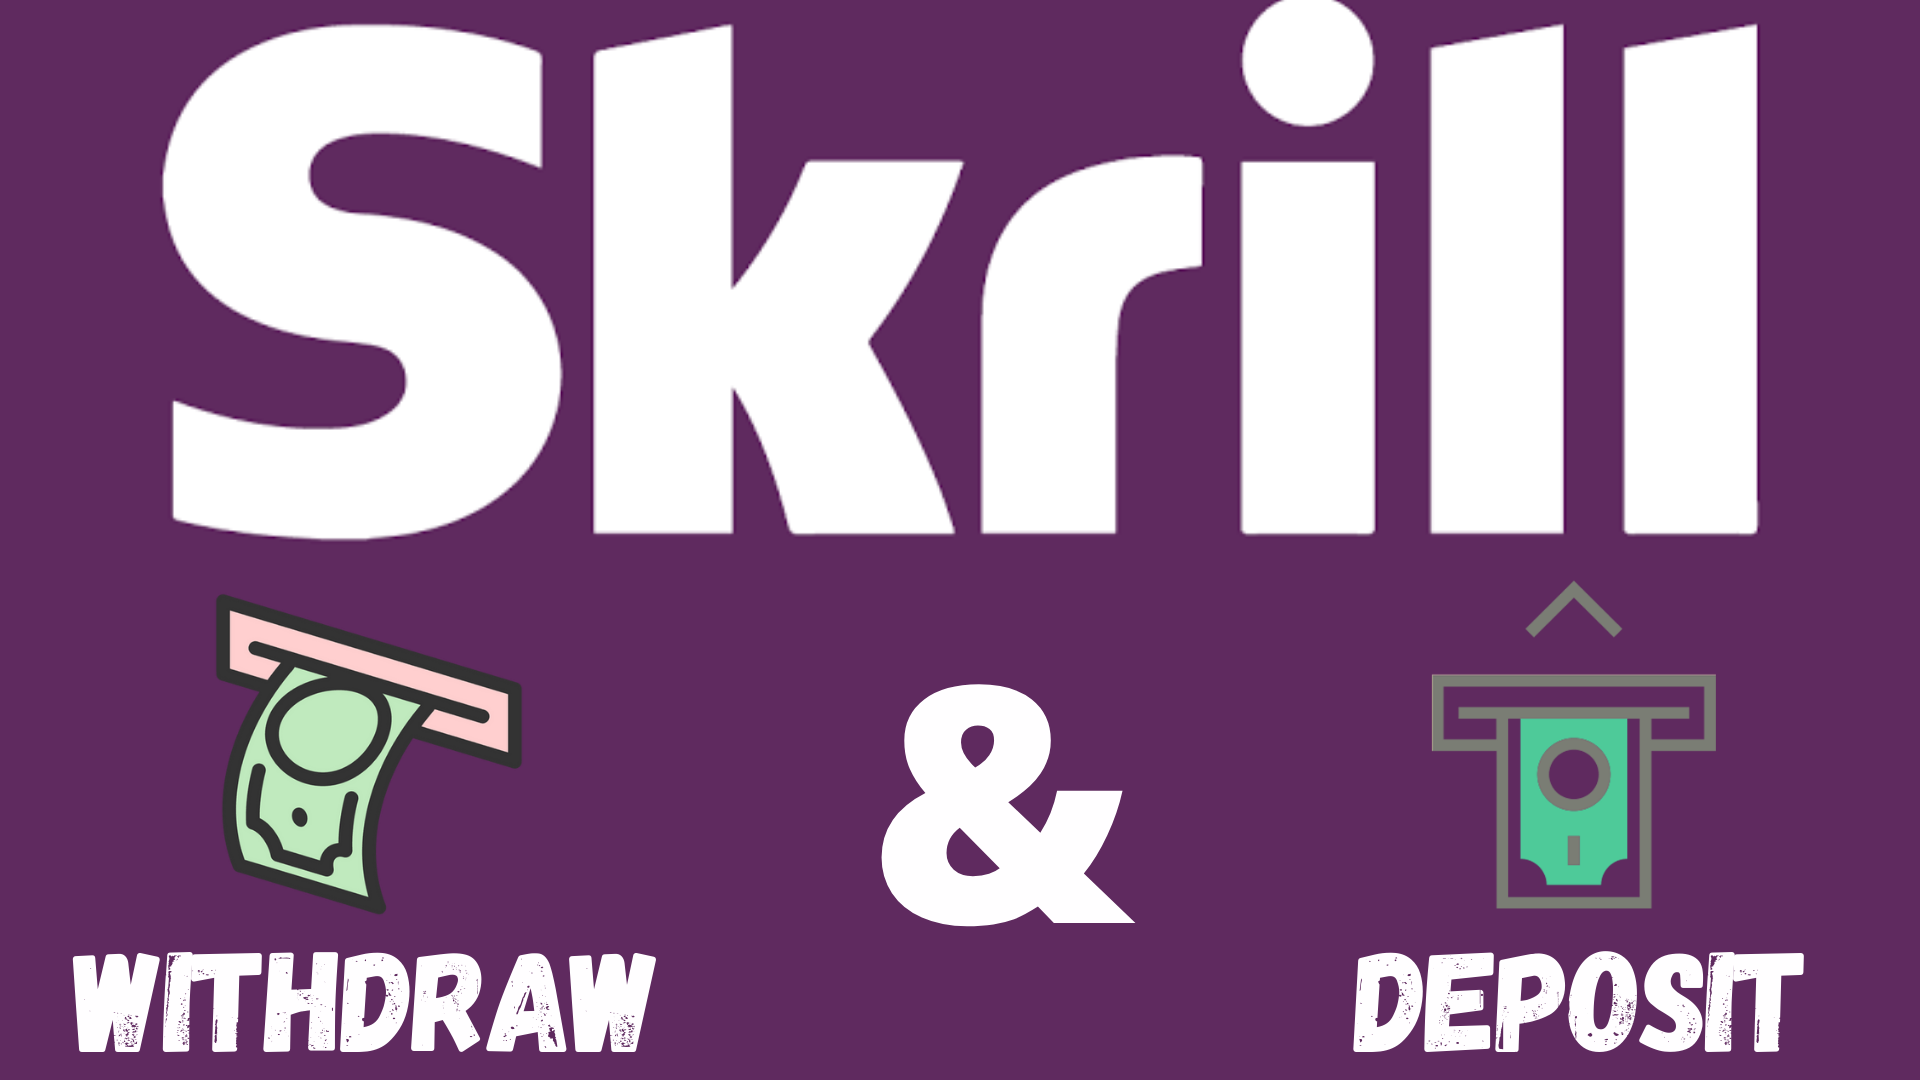 How to create Skrill Account? How to Withdraw and Deposit from Skrill Account?